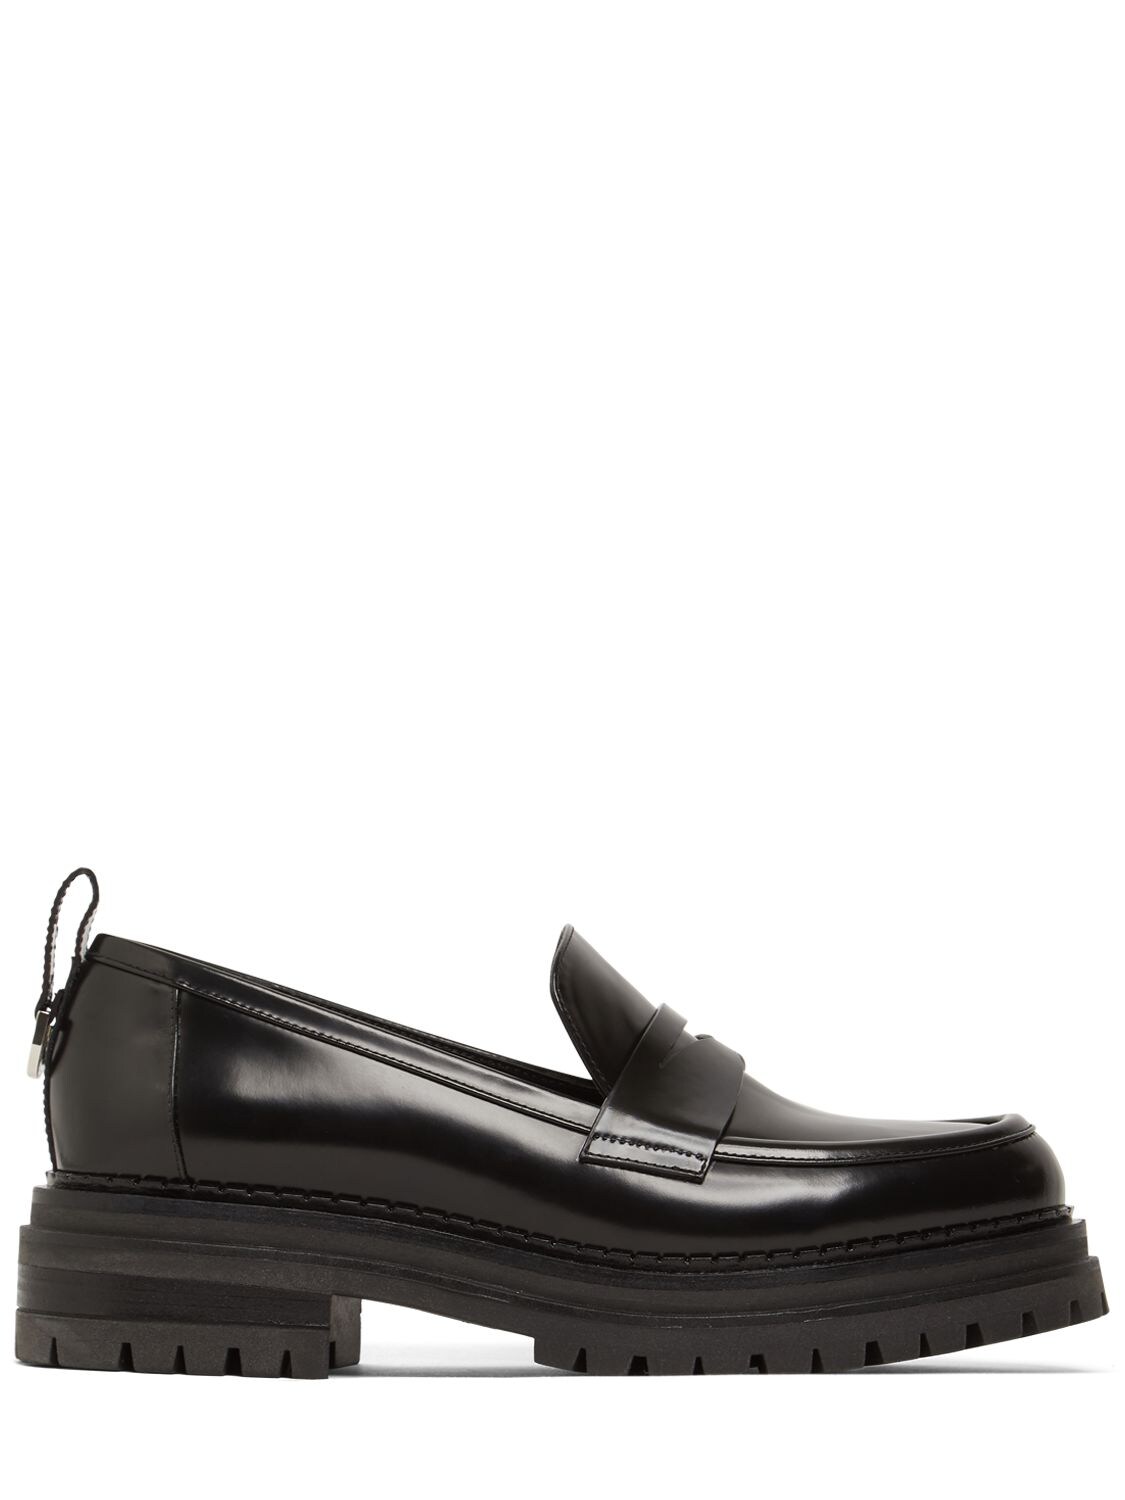 SERGIO ROSSI 30MM SR JOAN BRUSHED LEATHER LOAFERS